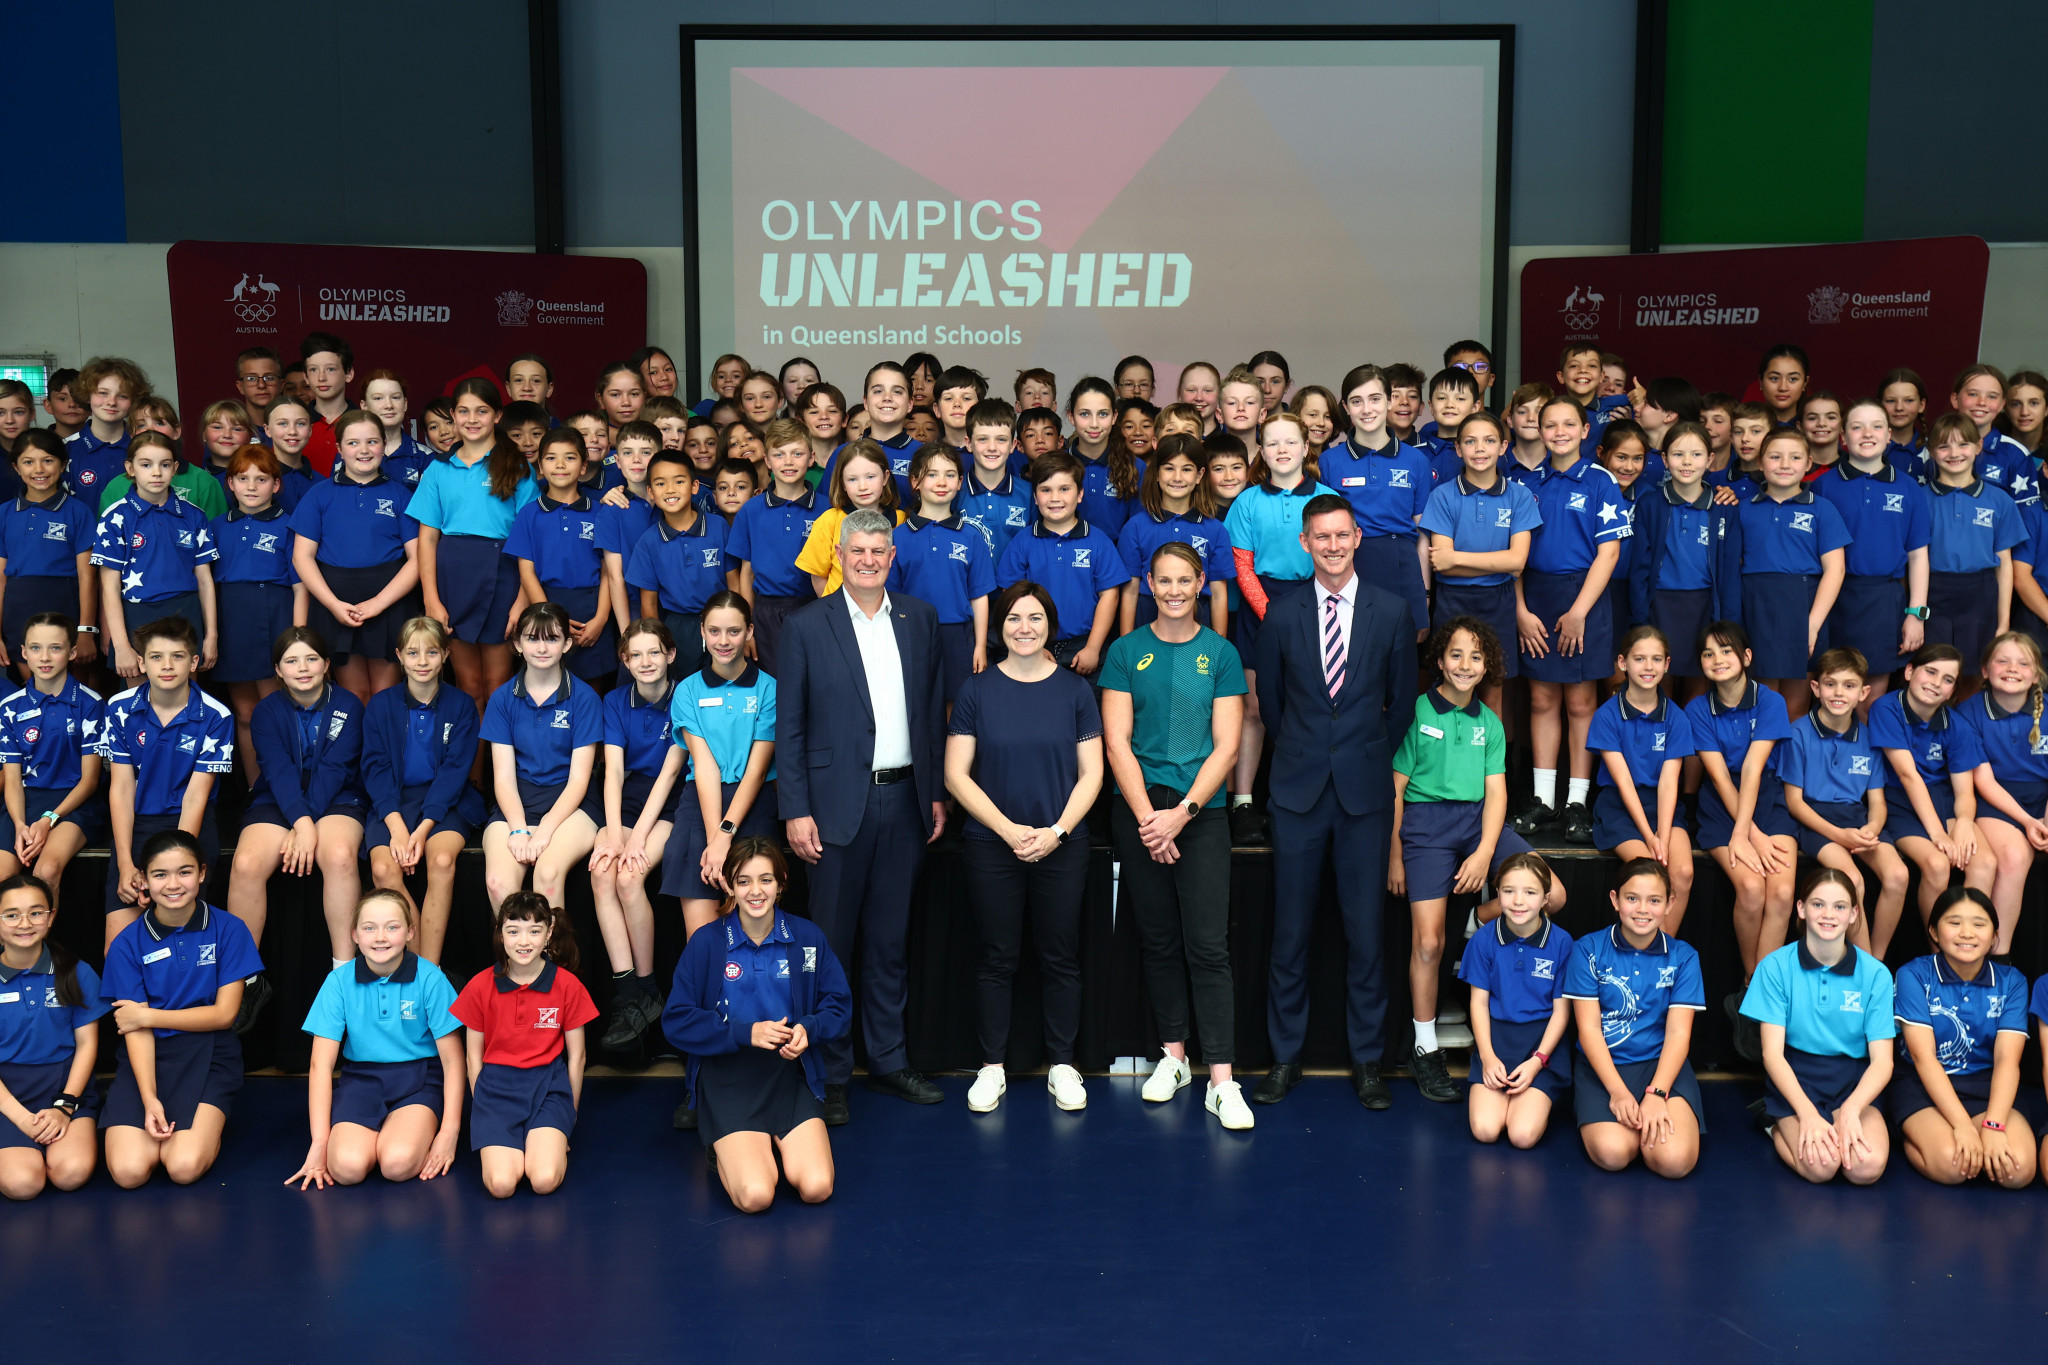 Australian Olympic Committee announces extension to Olympics Unleashed programme 